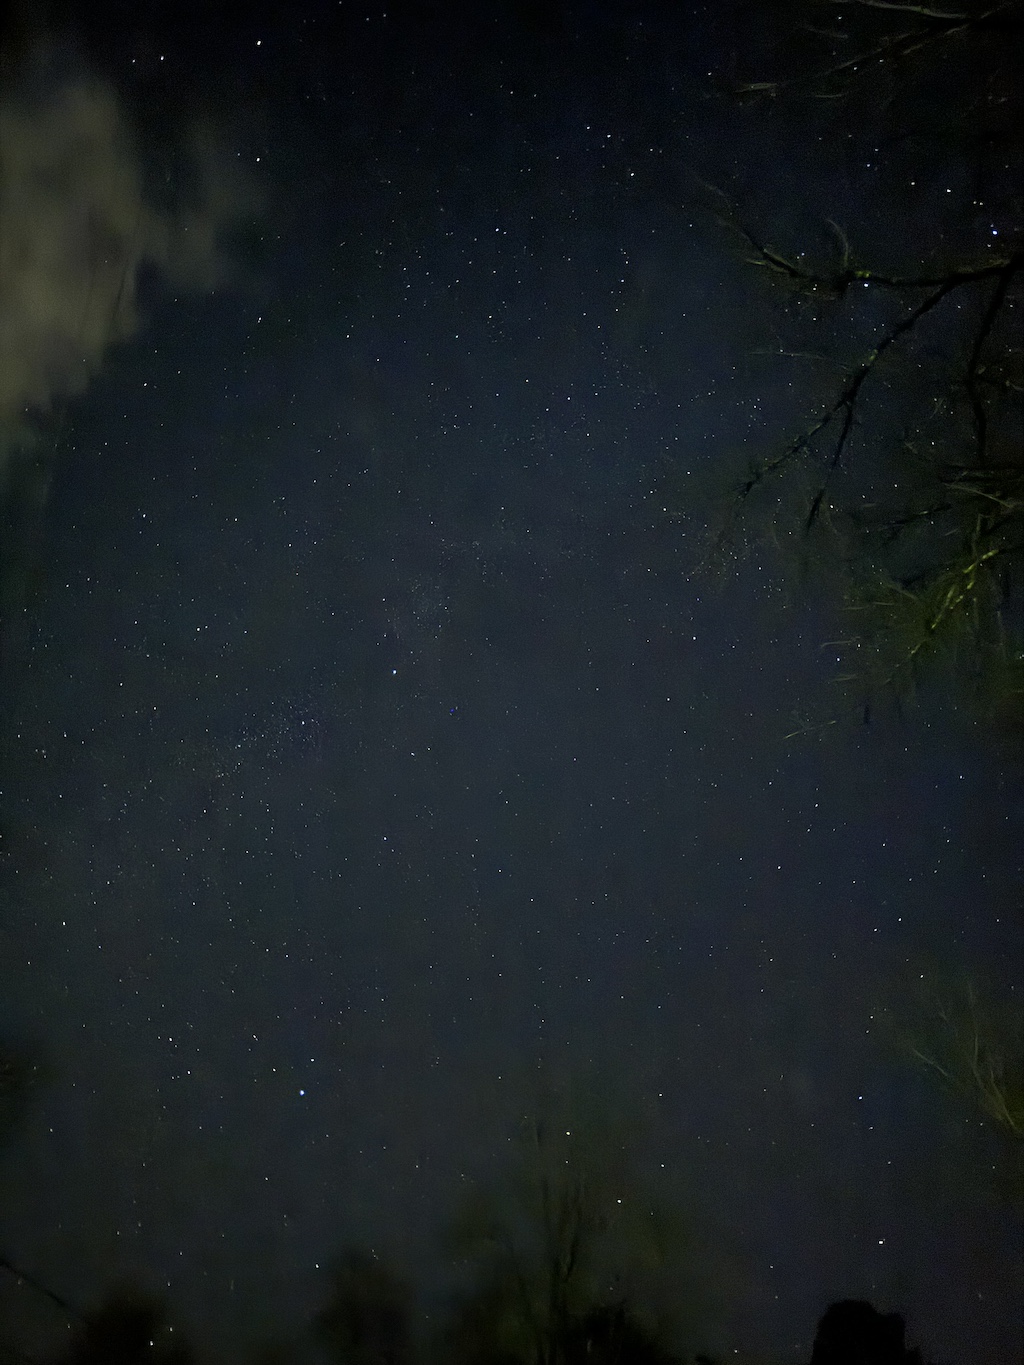 A nighttime shot of the stars, including a faintly-visible Milky Way.